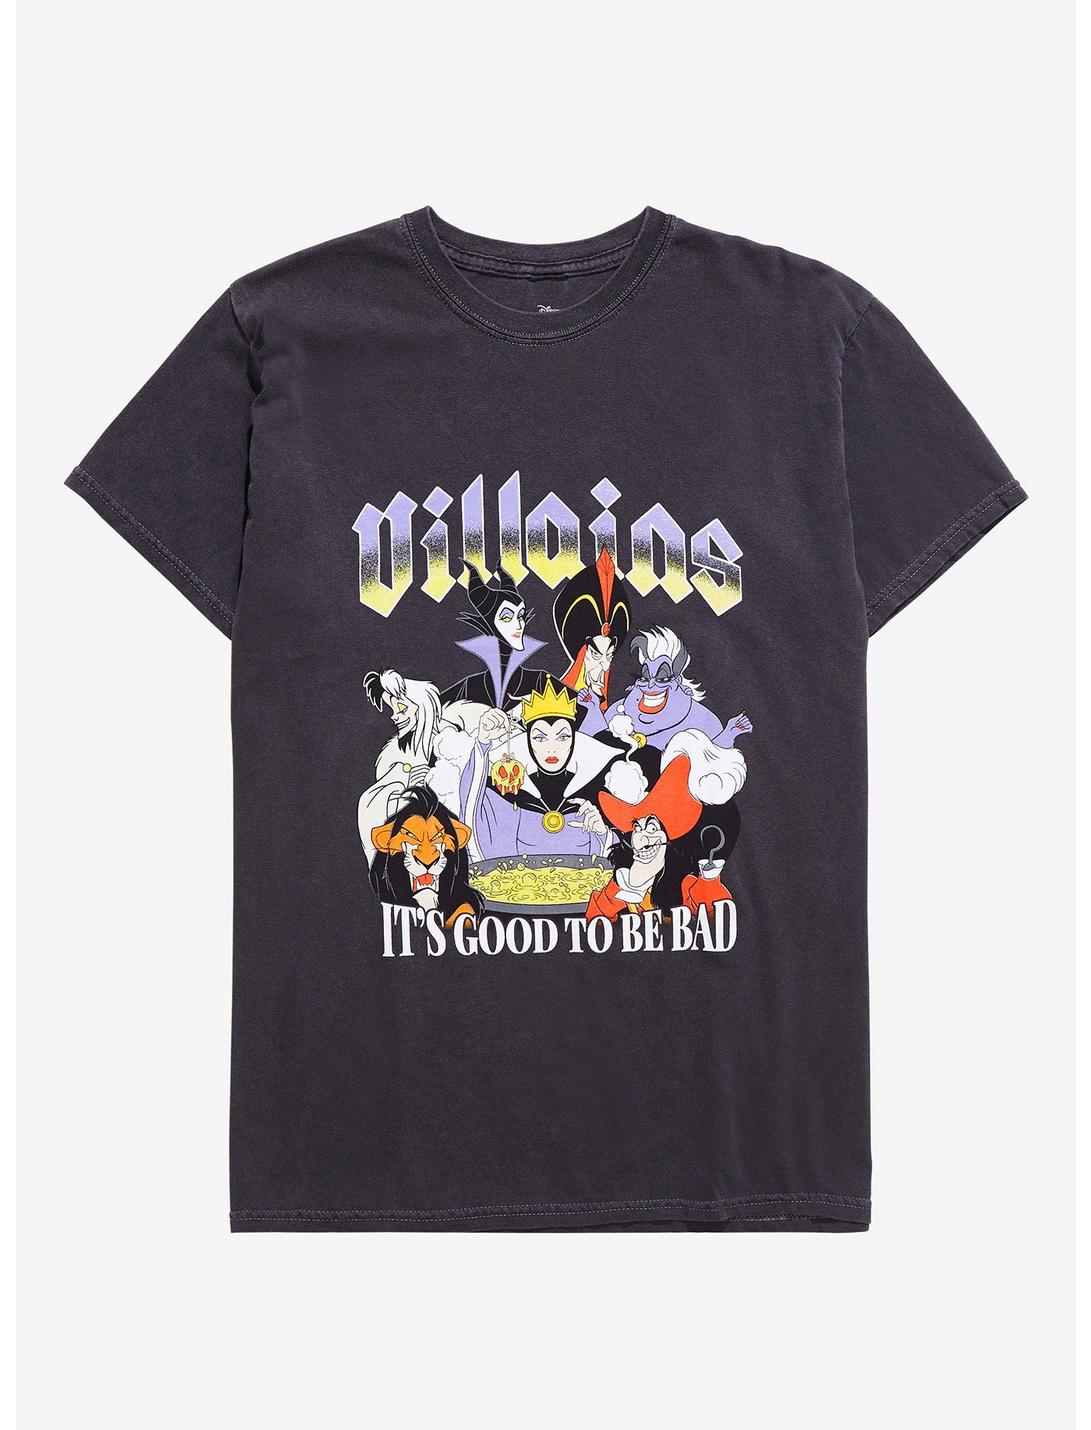 Disney Villains It's Good to Be Bad T-Shirt - BoxLunch Exclusive, HEATHER GREY, hi-res